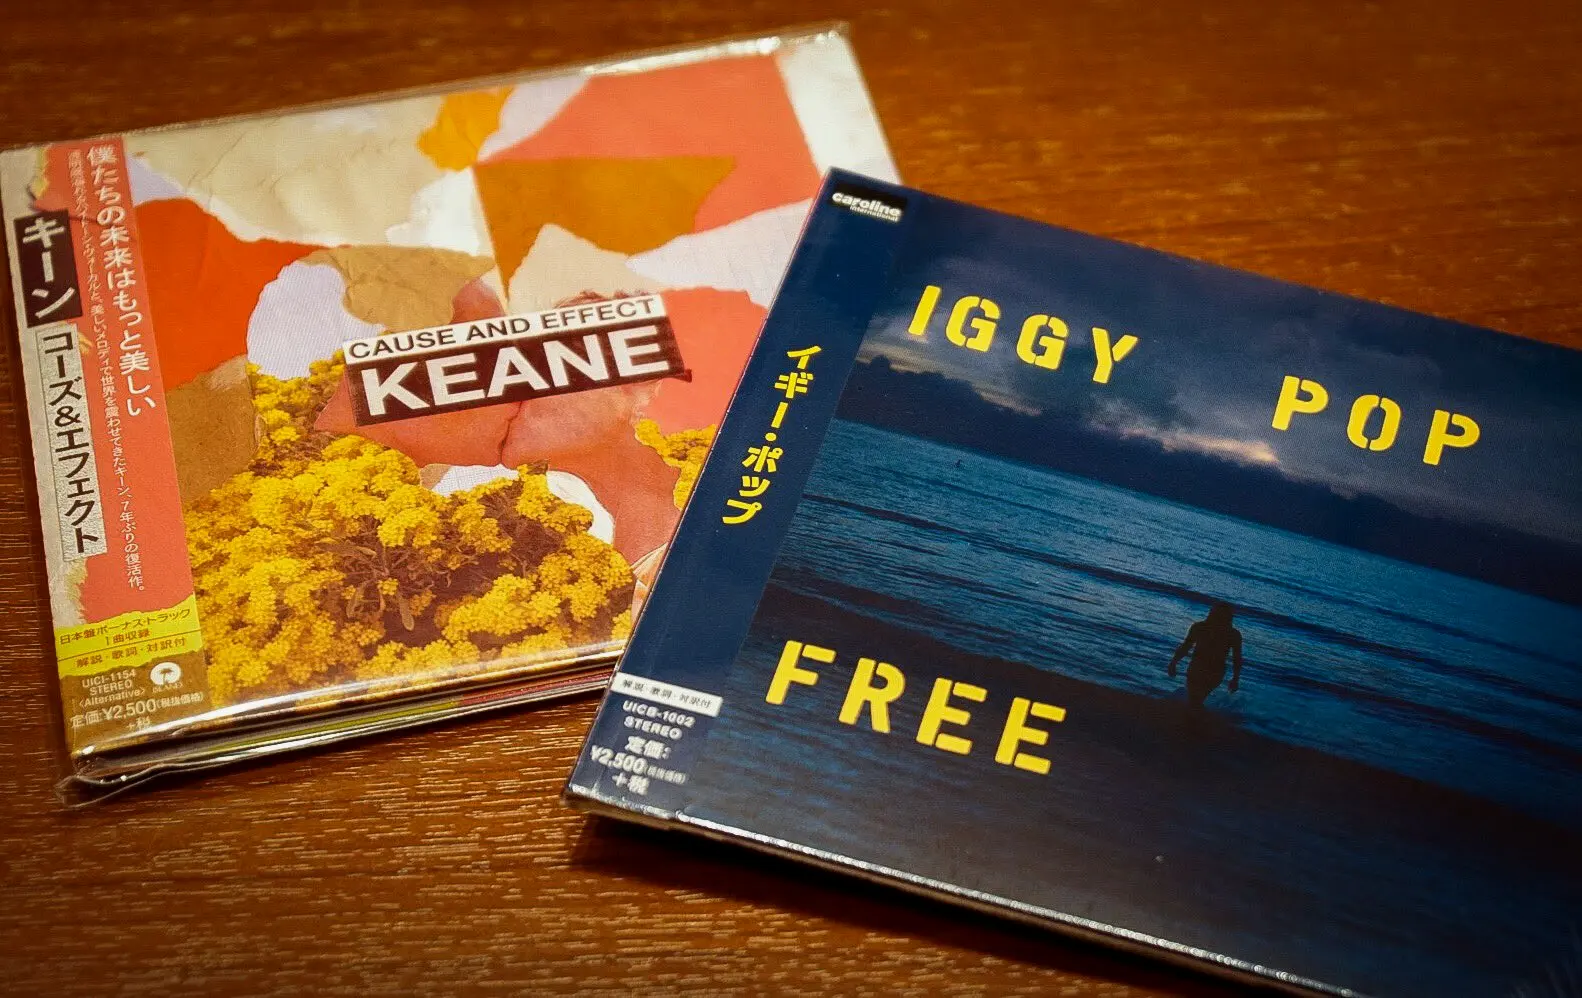 1.Free-Iggy Pop、Cause And Effect-Keane